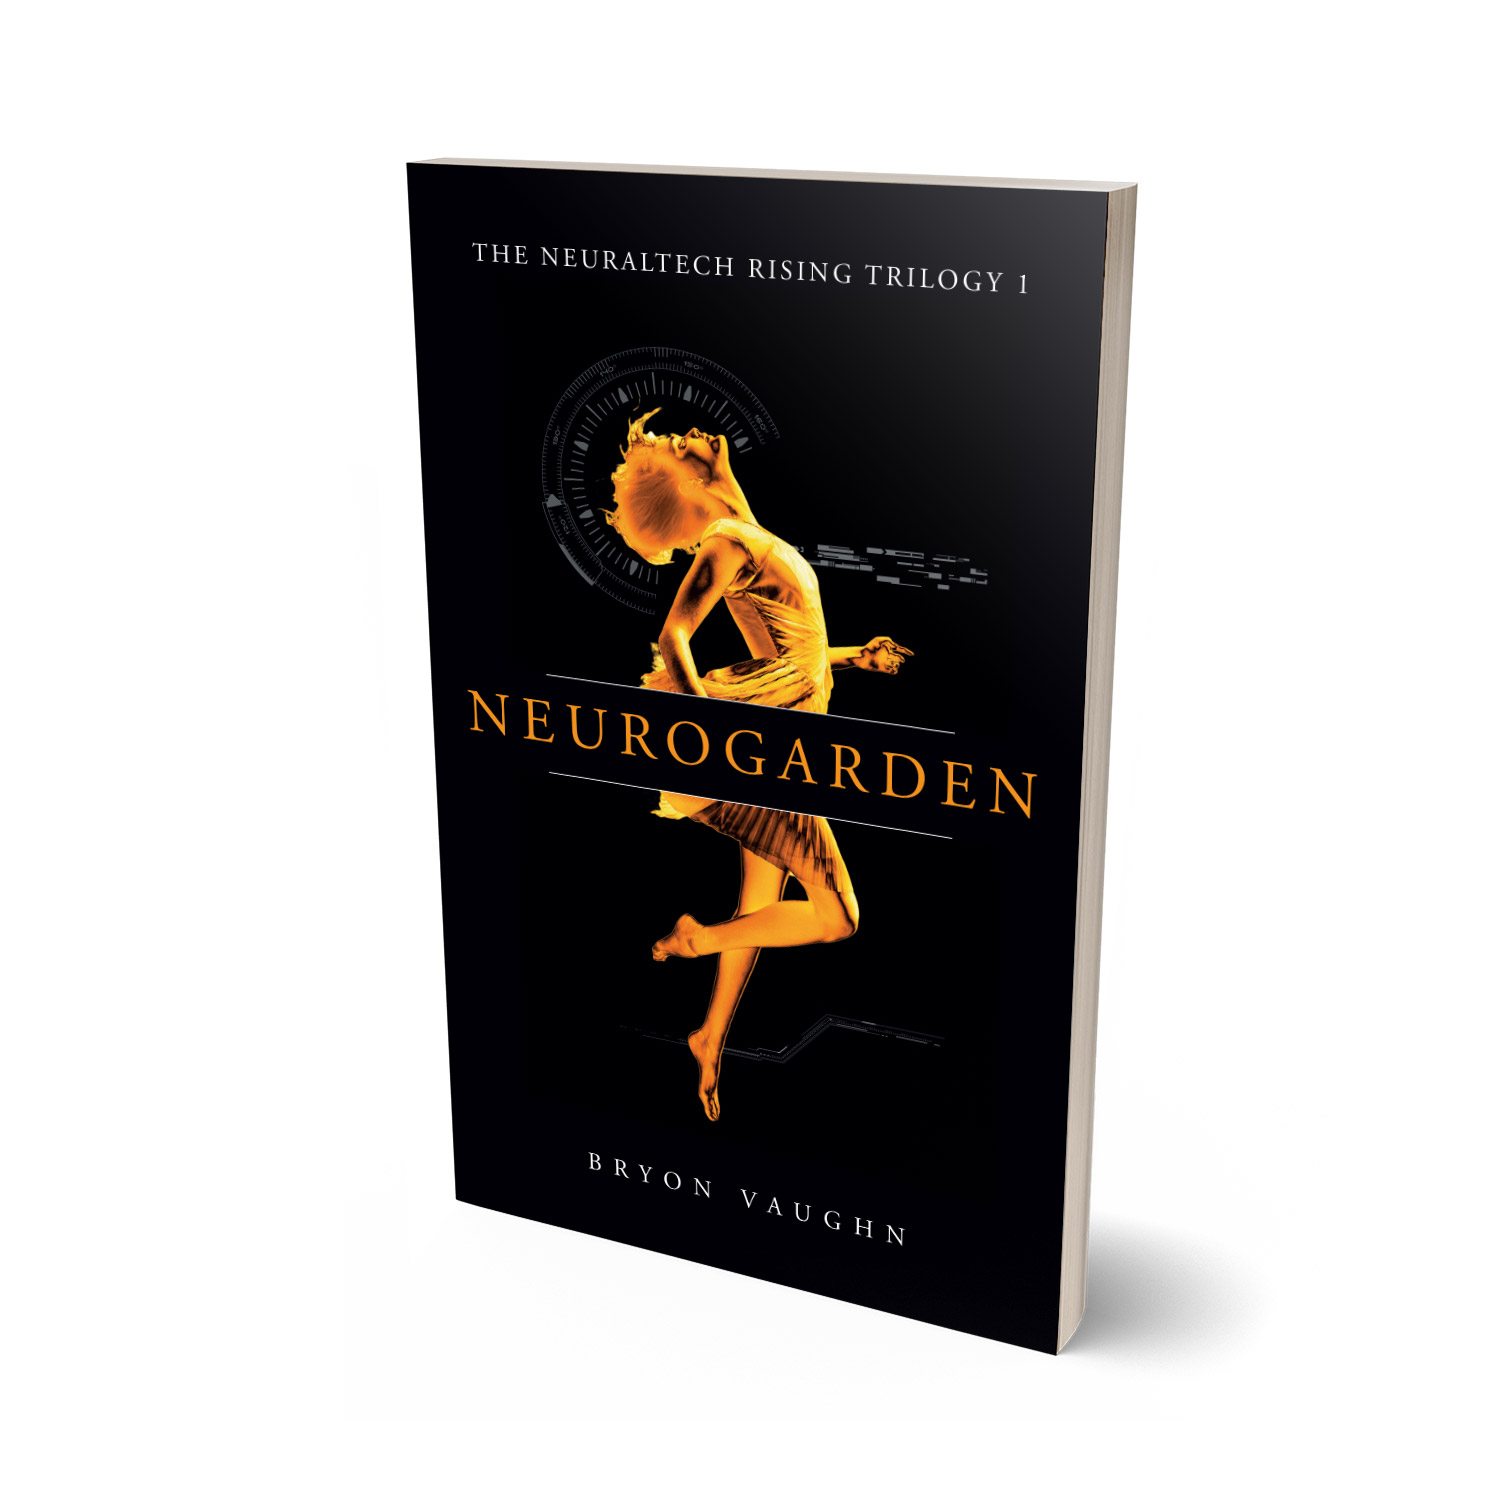 'Neurogarden' is a classy cyber thriller by author Bryon Vaughn. The book cover design is by Mark Thomas. To learn more about what Mark could do for your book, please visit coverness.com.